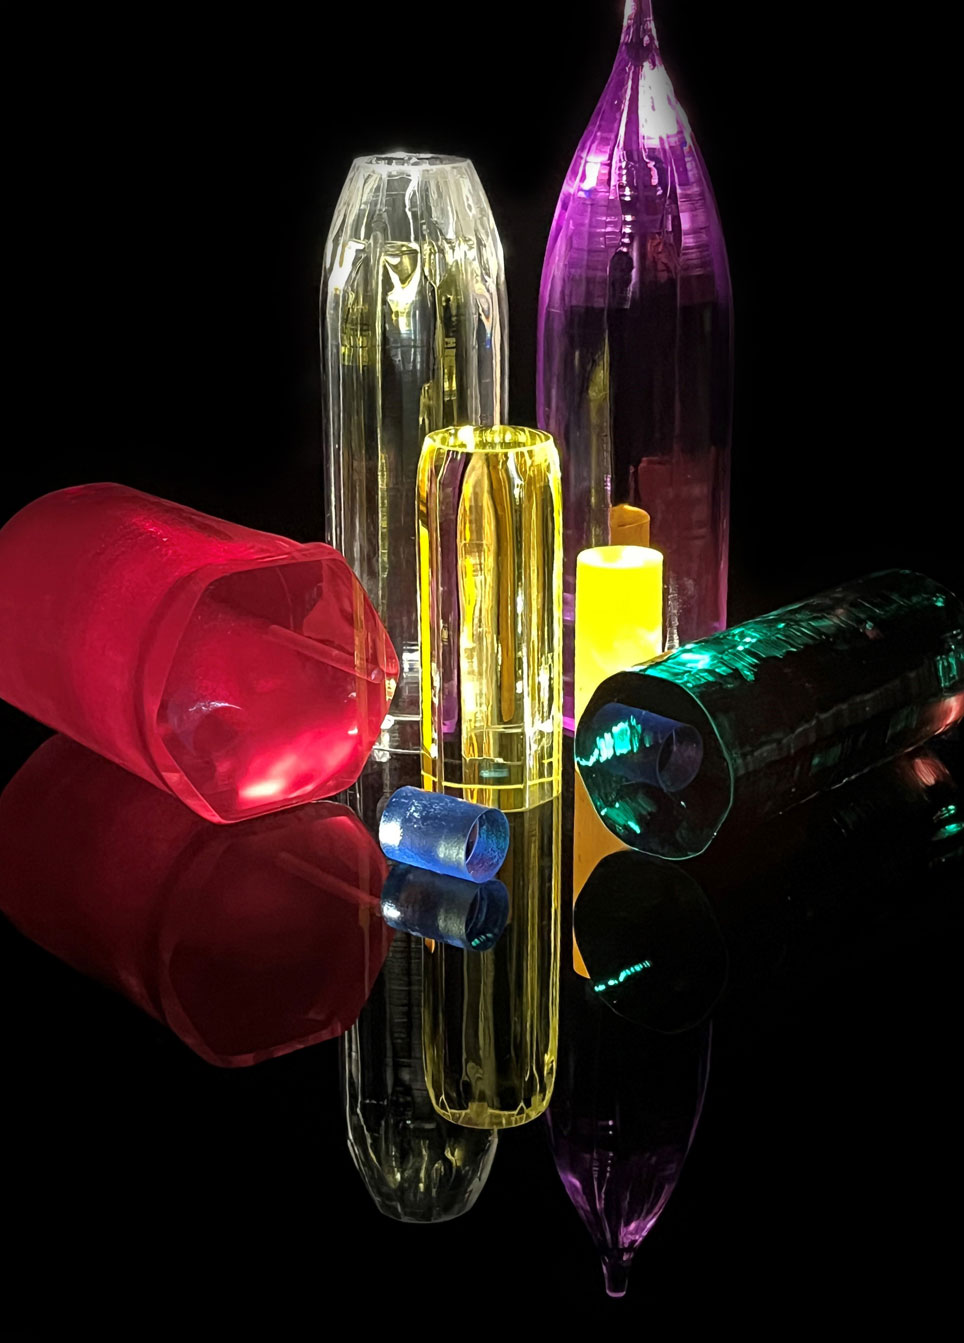 Crystals of various colors - including yellow, pink, green, purple and white - are positioned together and lit up.